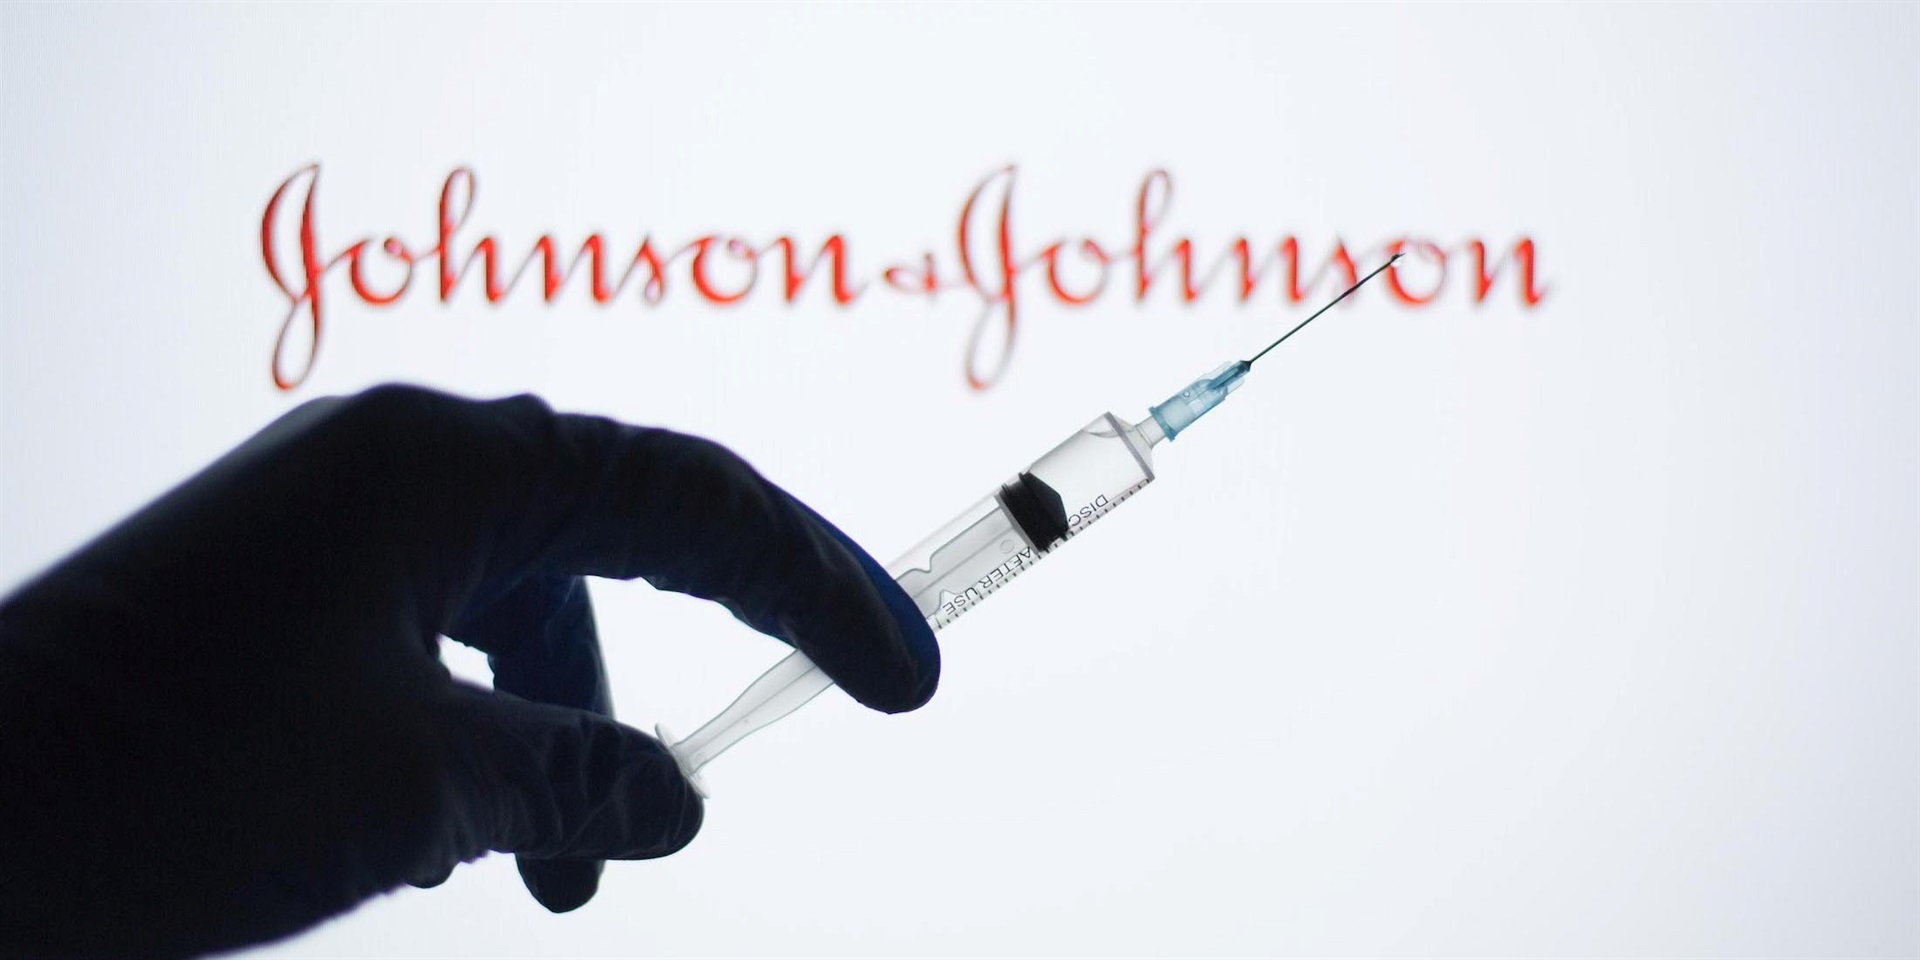 A local researcher has spoken about the J&J vaccine.